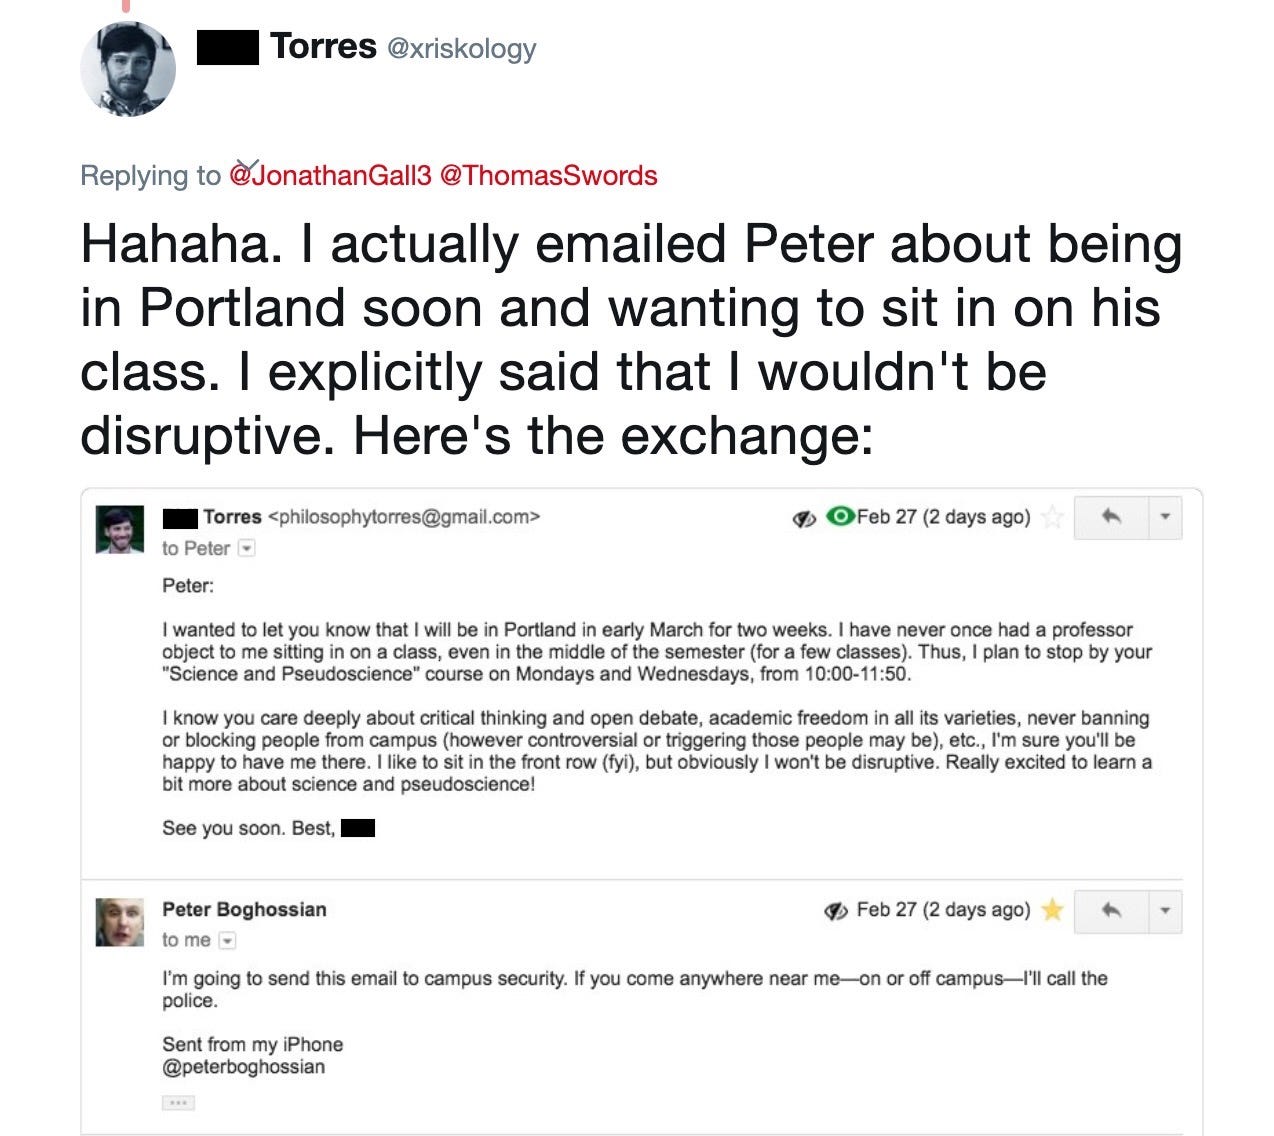 Phil Torres: Hahaha. I actually emailed Peter about being in Portland soon and wanting to sit in on his class. I explicitly said that I wouldn't be disruptive. Here's the exchange. Phil Torres: I wanted to let you know that I will be in Portland in early March for two weeks. I have never once had a professor object to me sitting in on a class, even in the middle of the semester (for a few classes). Thus, I plan to stop by your "Science and Pseudoscience" course on Mondays and Wednesdays, from 10:00-11:50. I know you care deeply about critical thinking and open debate, academic freedom in all its varieties, never banning or blocking people from campus (however controversial or triggering those people may be), etc., I'm sure you'll be happy to have me there. I like to sit in the front row (for your interest), but obviously I won't be disruptive. Really excited to learn a bit more about science and pseudoscience! See you soon. Best, Phil. Peter Boghossian: I'm going to send this email to campus security. If you come anywhere near me on or off campus, I'll call the police.